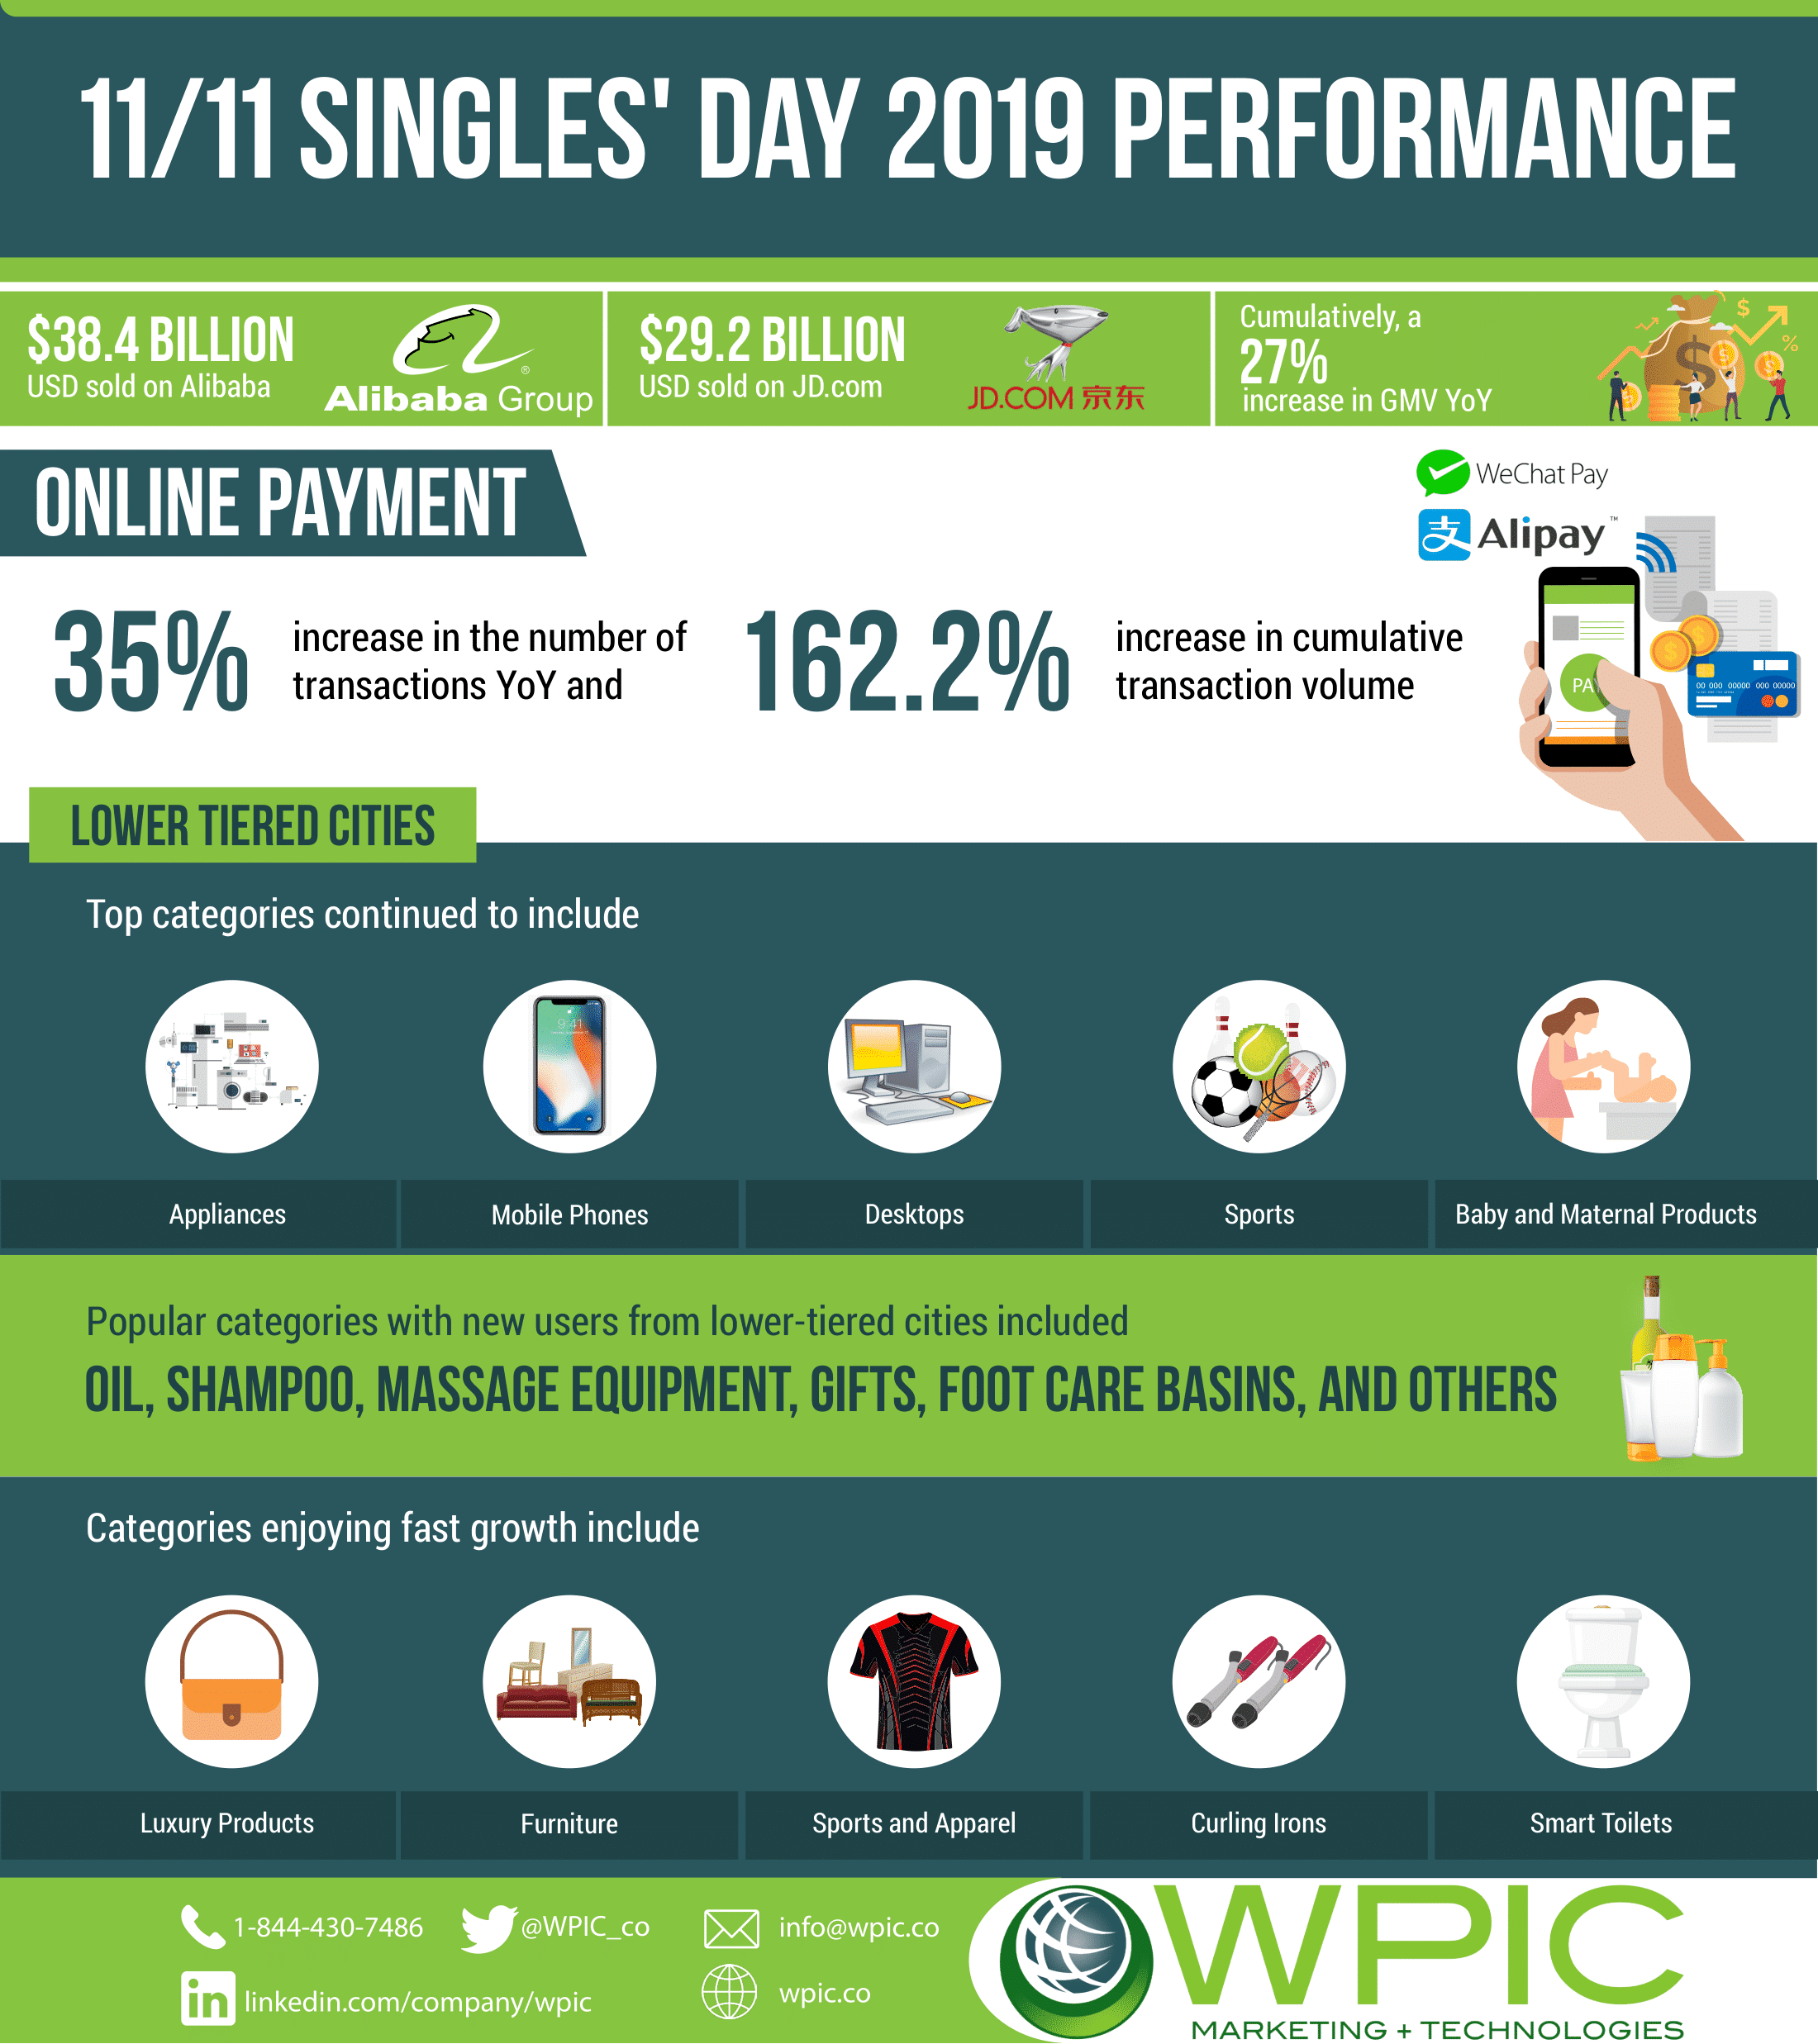 11/11 Singles' day 2019 performance infographic